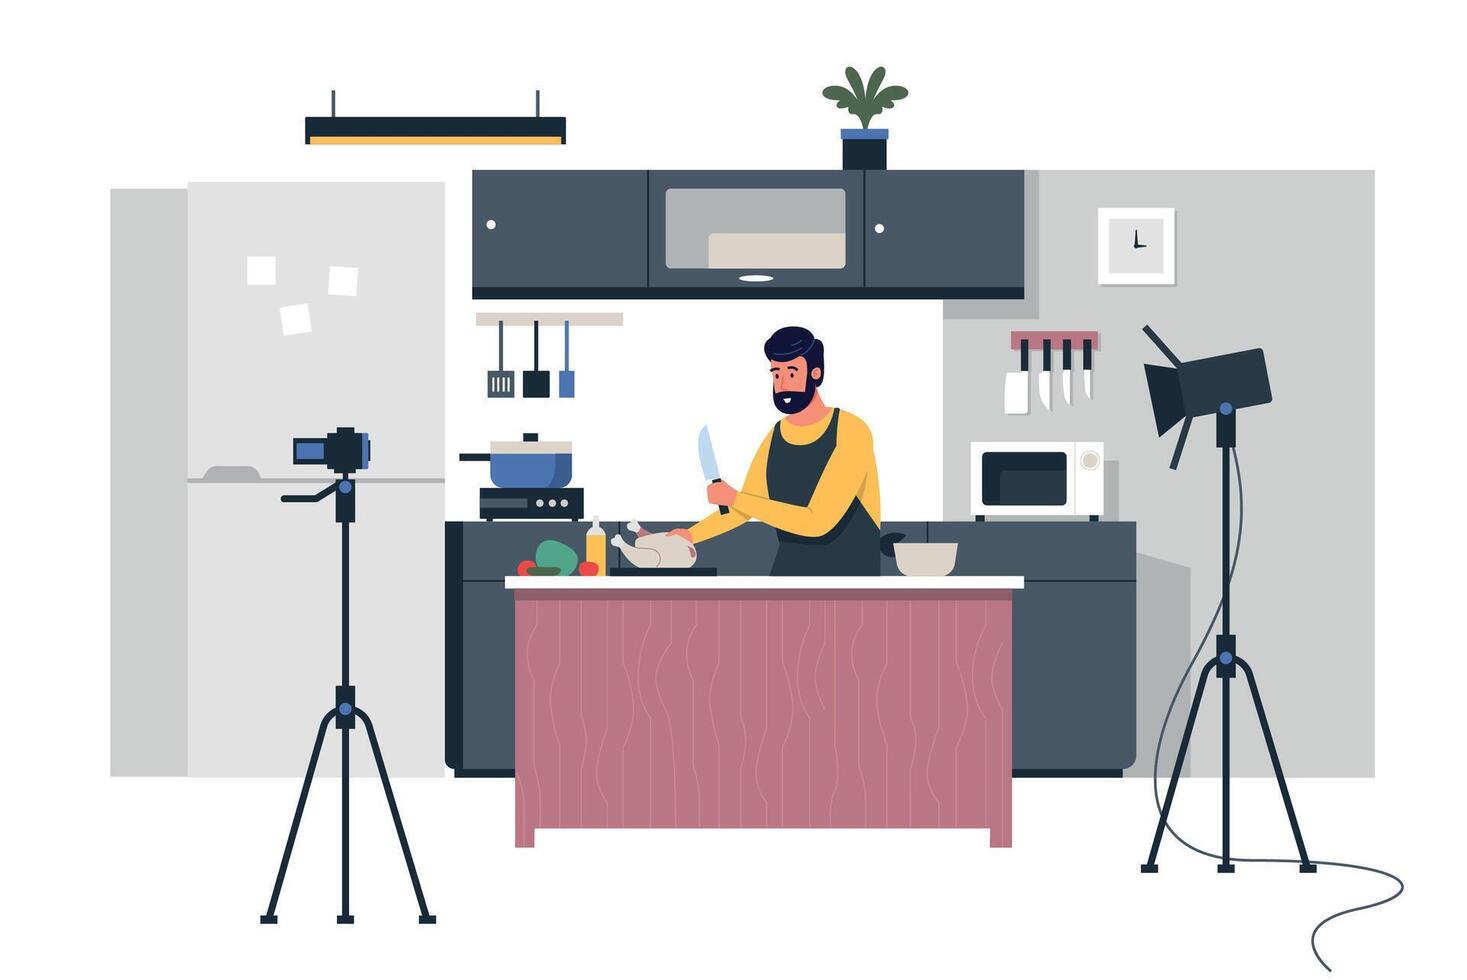 Cooking blogger. Cartoon person prepare food and streaming, trendy culinary vlogger making content and teaching. Vector modern cooking channel illustration